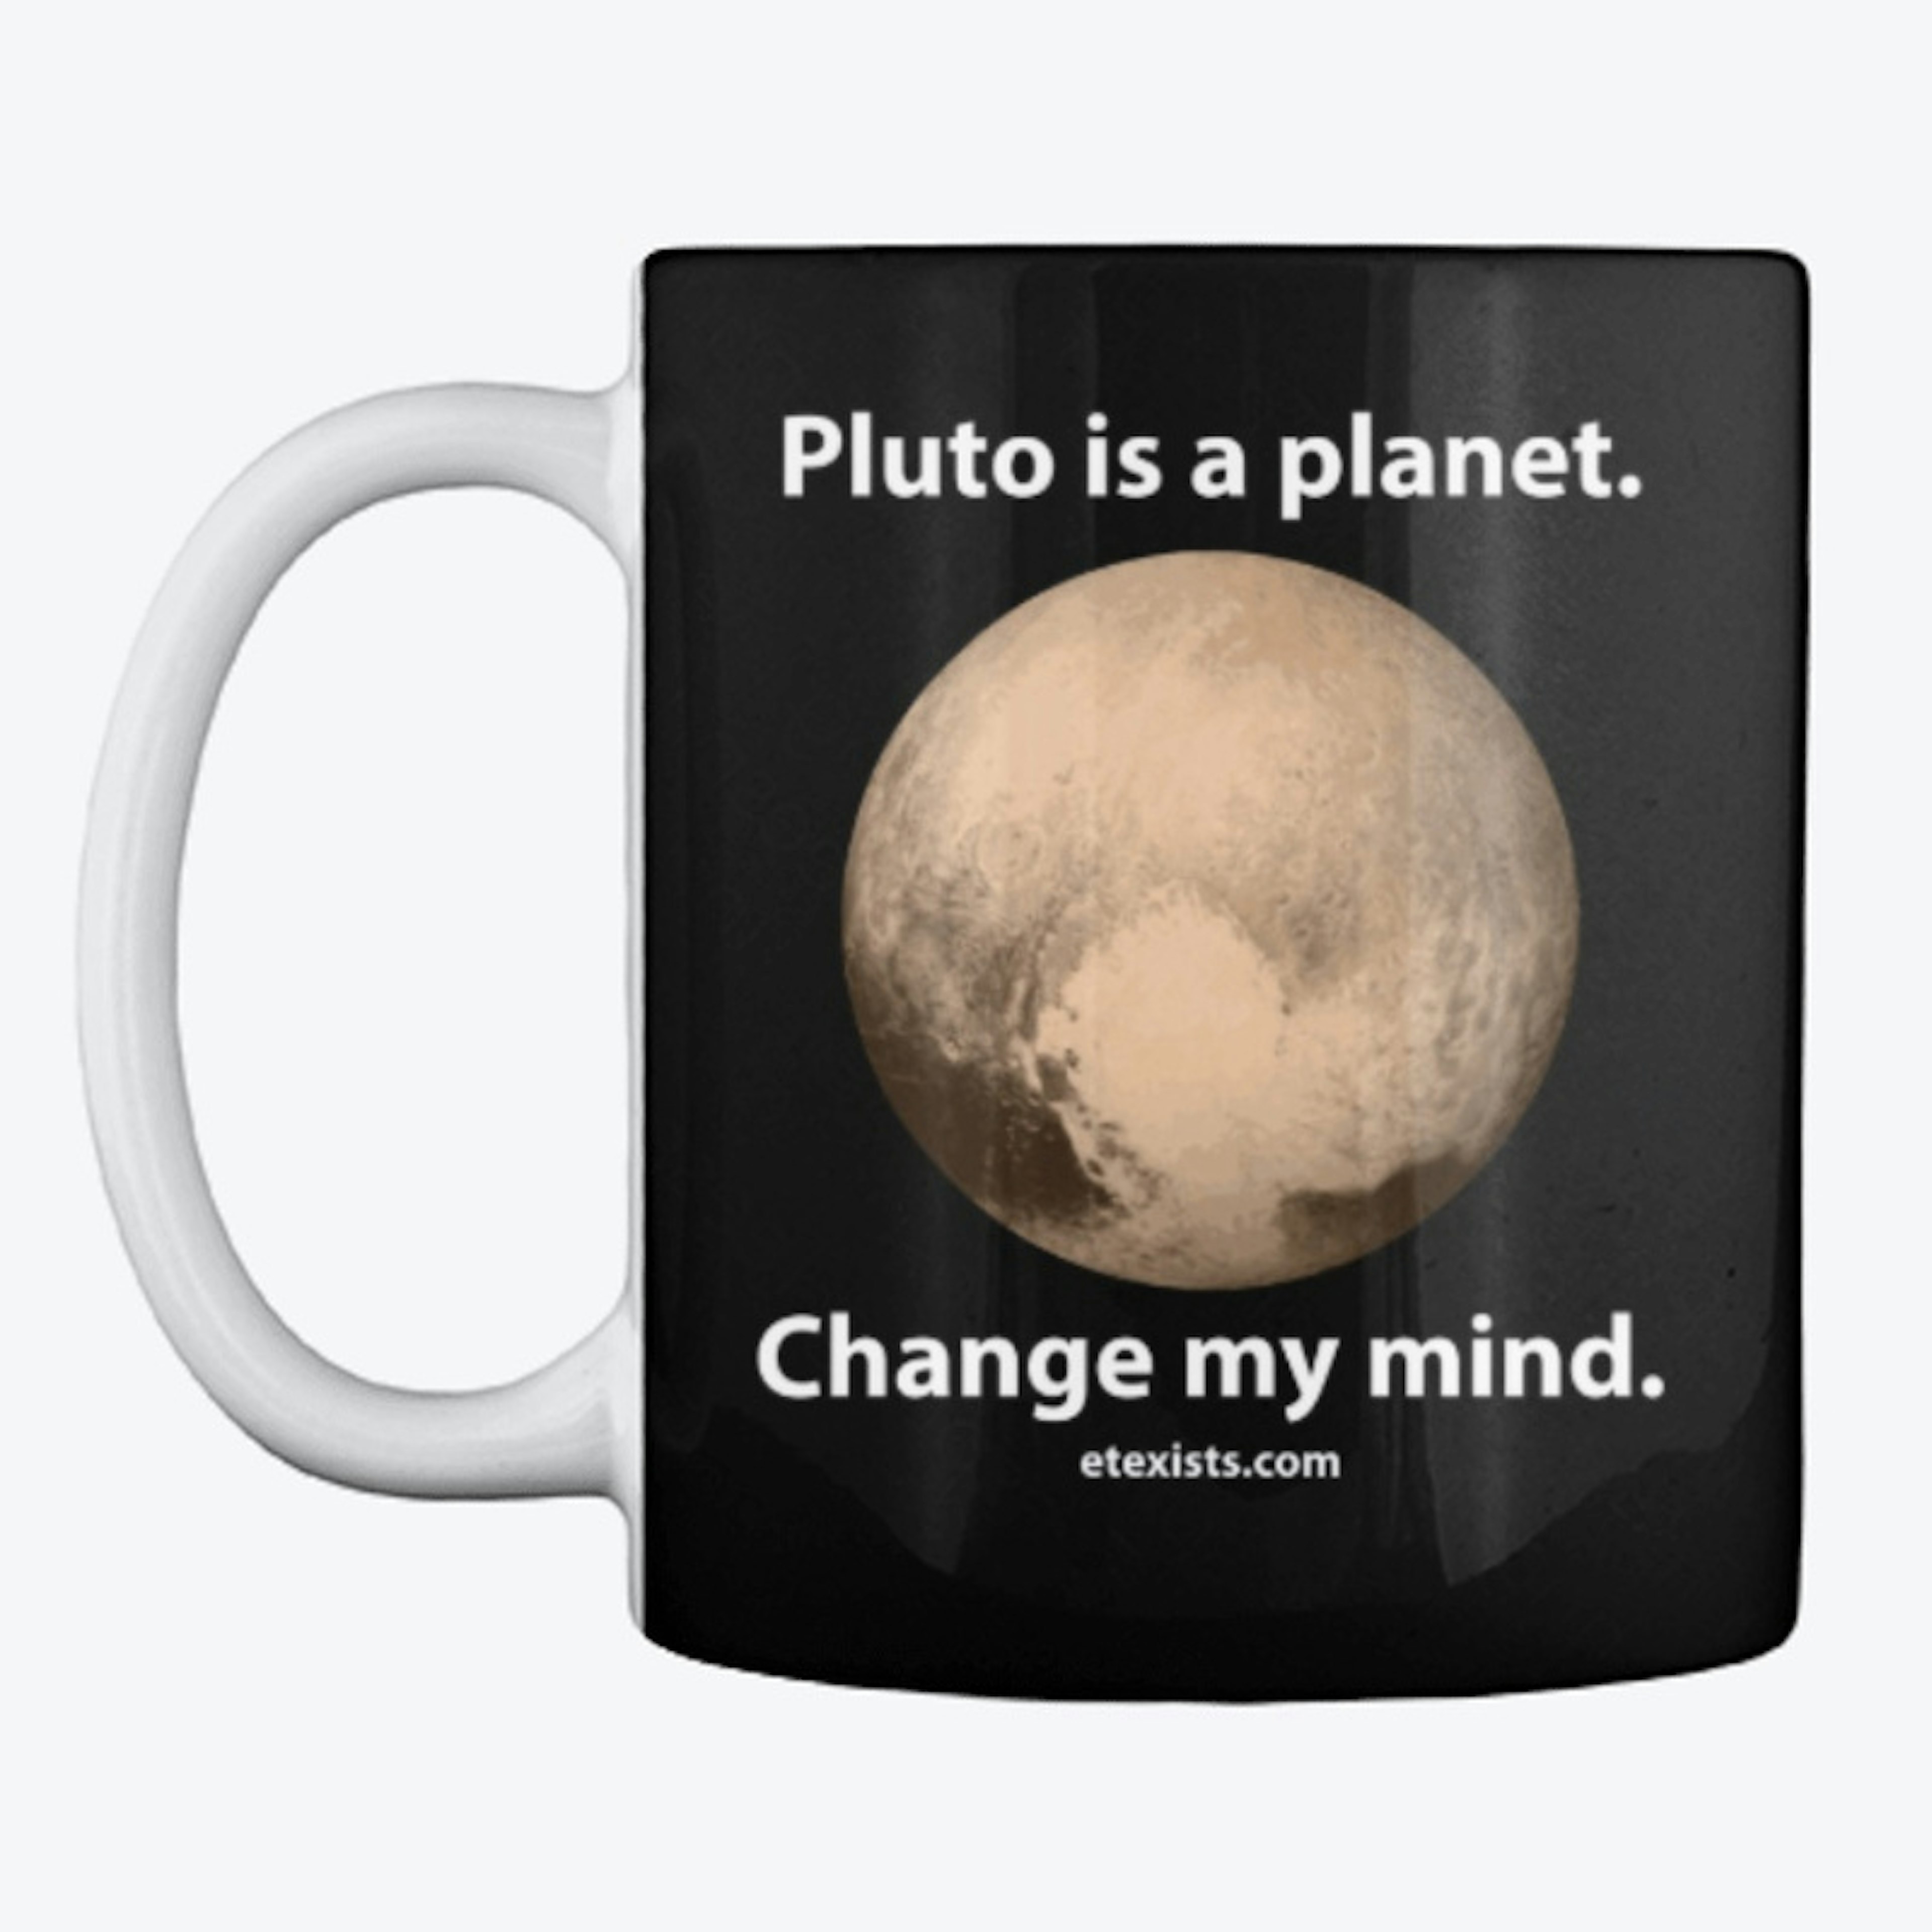 Pluto is a planet...